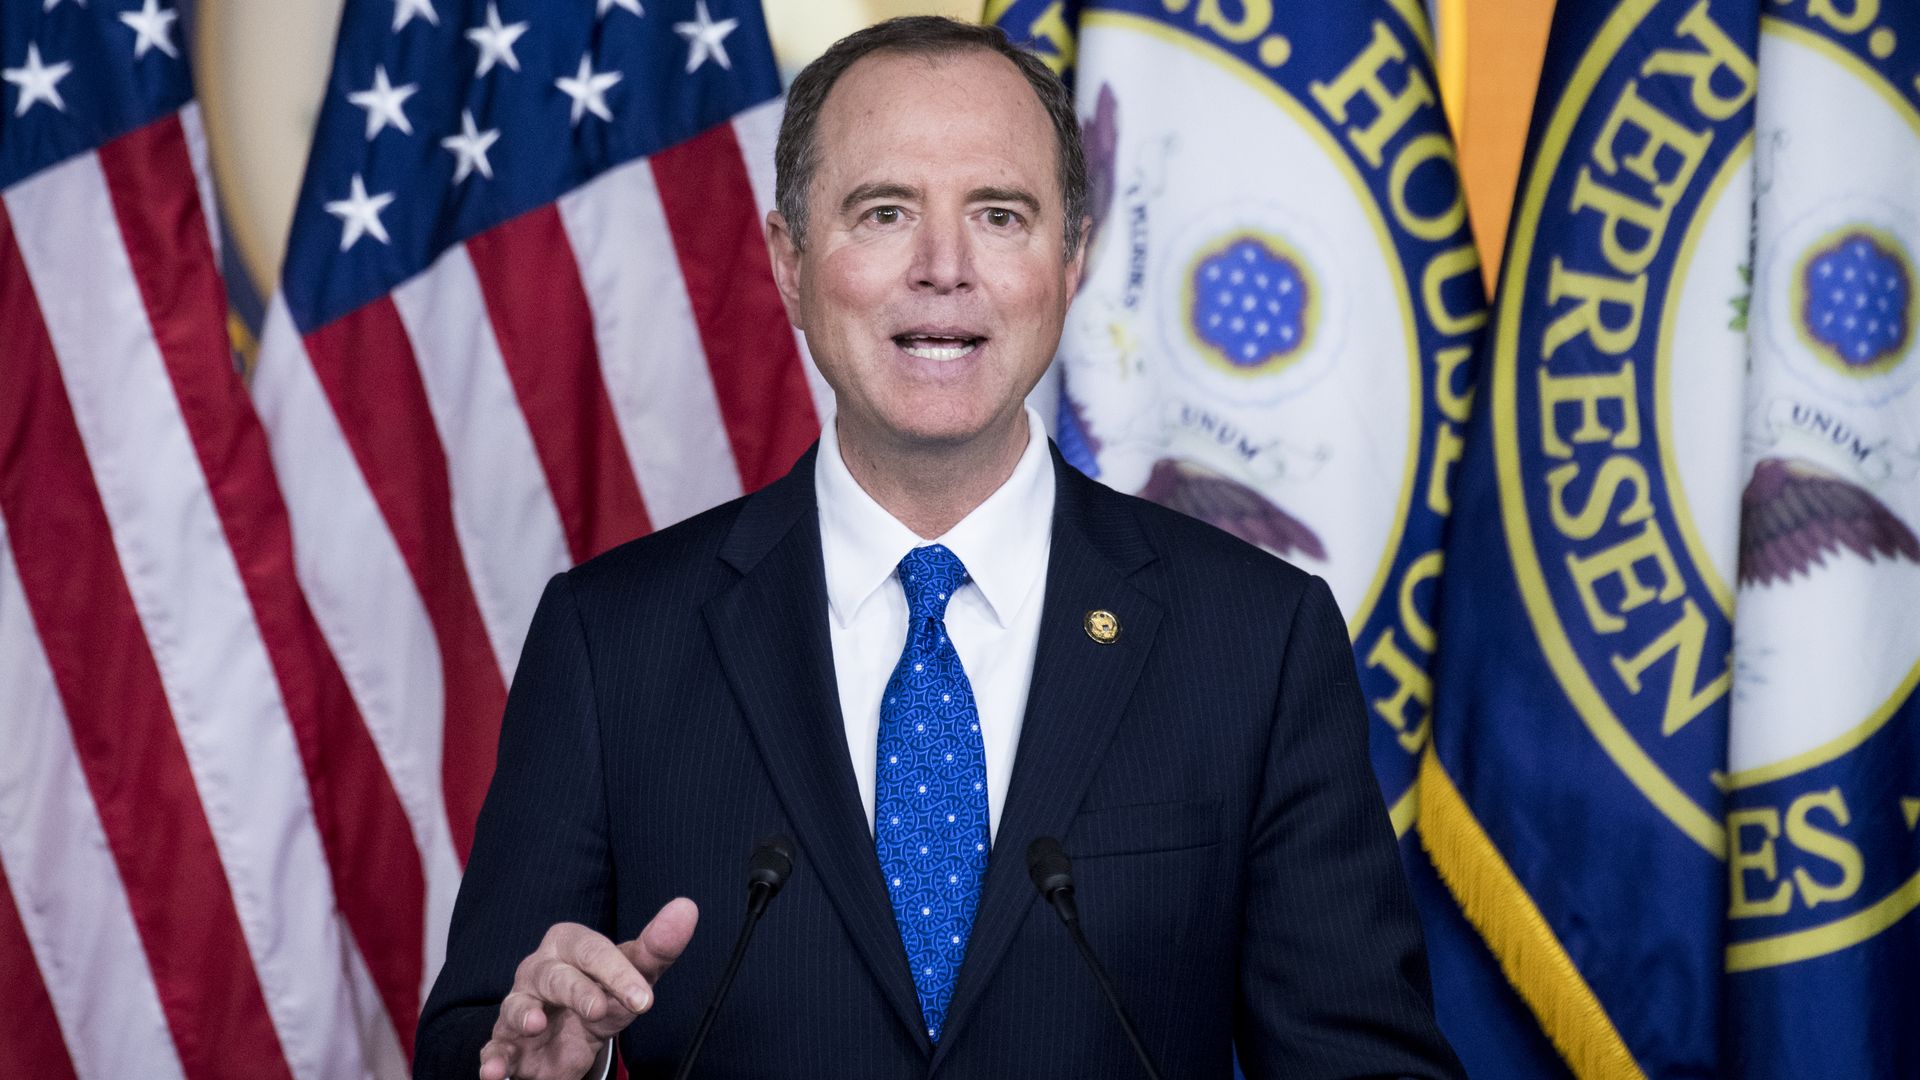  House Intelligence Committee chairman Adam Schiff, D-Calif., holds a press conference on the committees impeachment report in the Capitol on Tuesday, Dec. 3